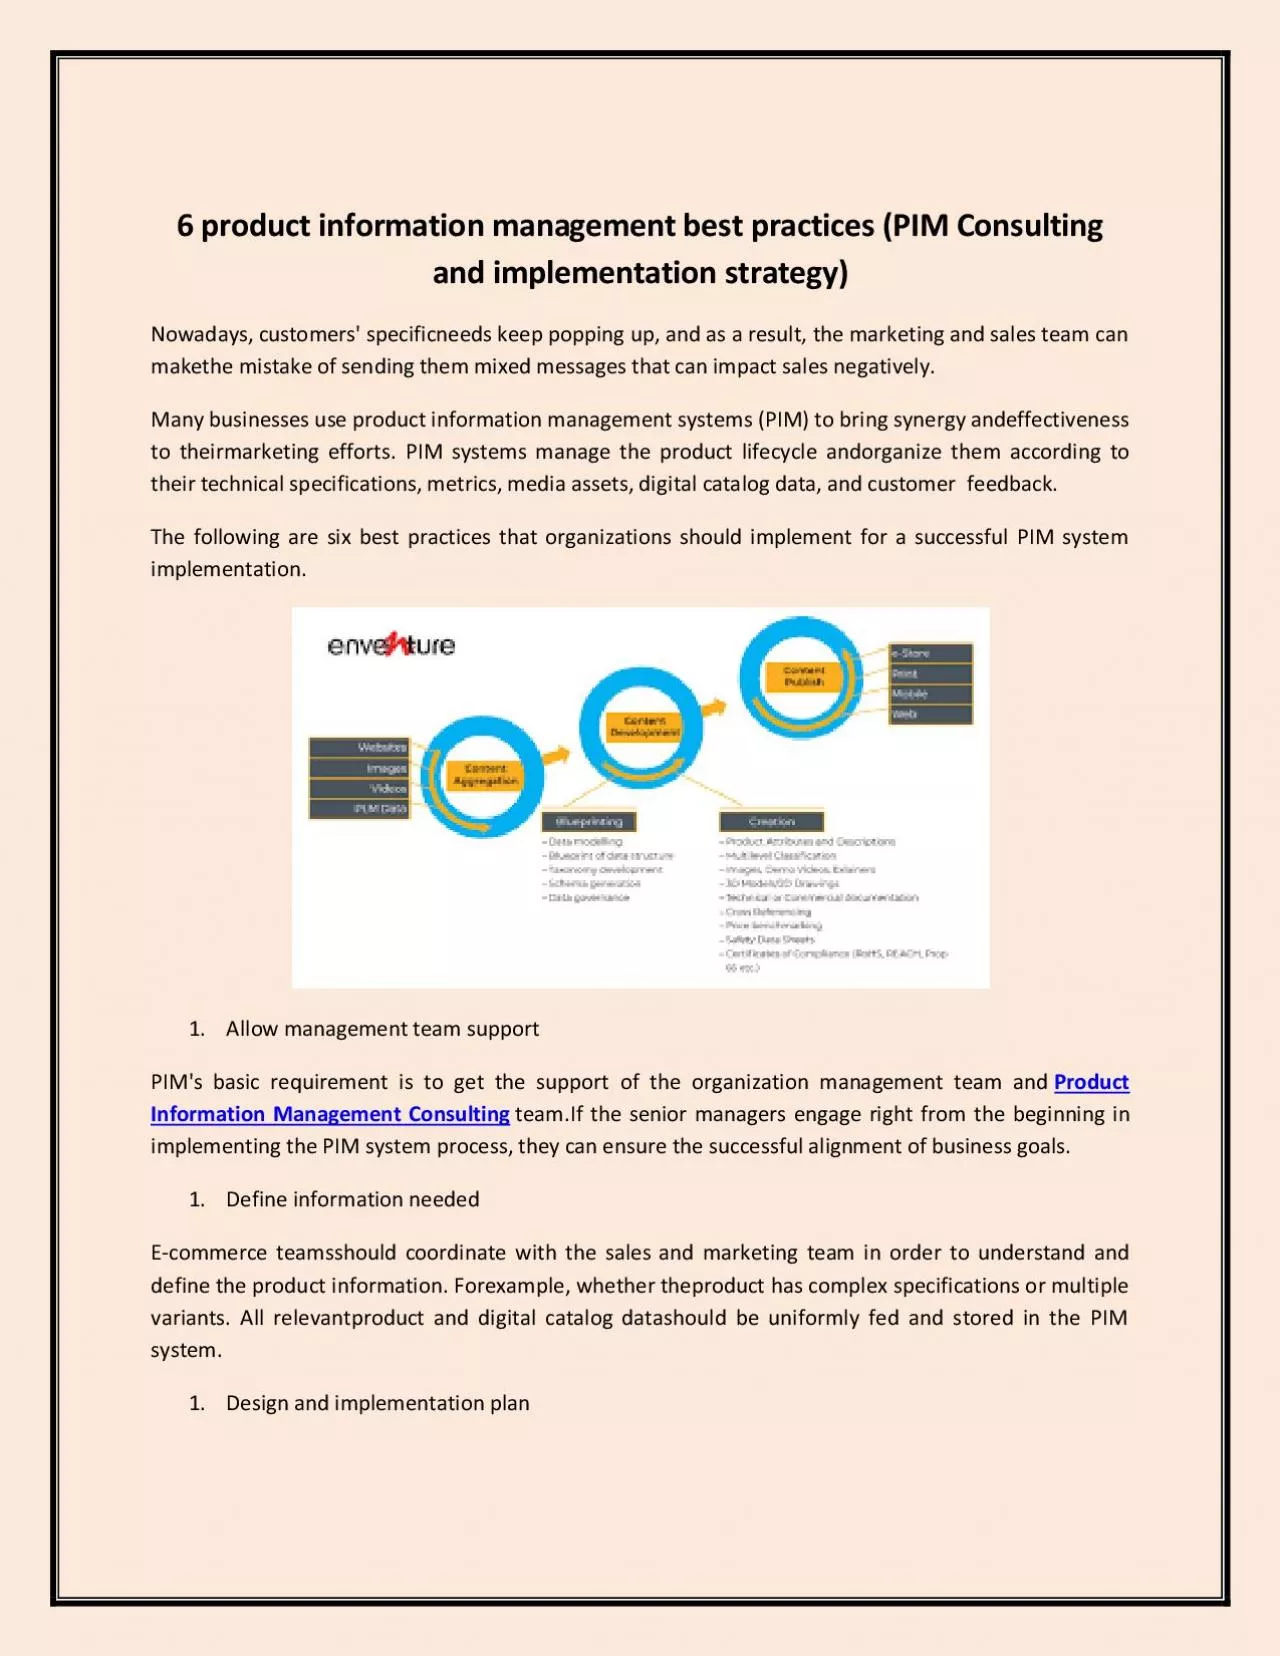 6 product information management best practices (PIM Consulting and implementation strategy)